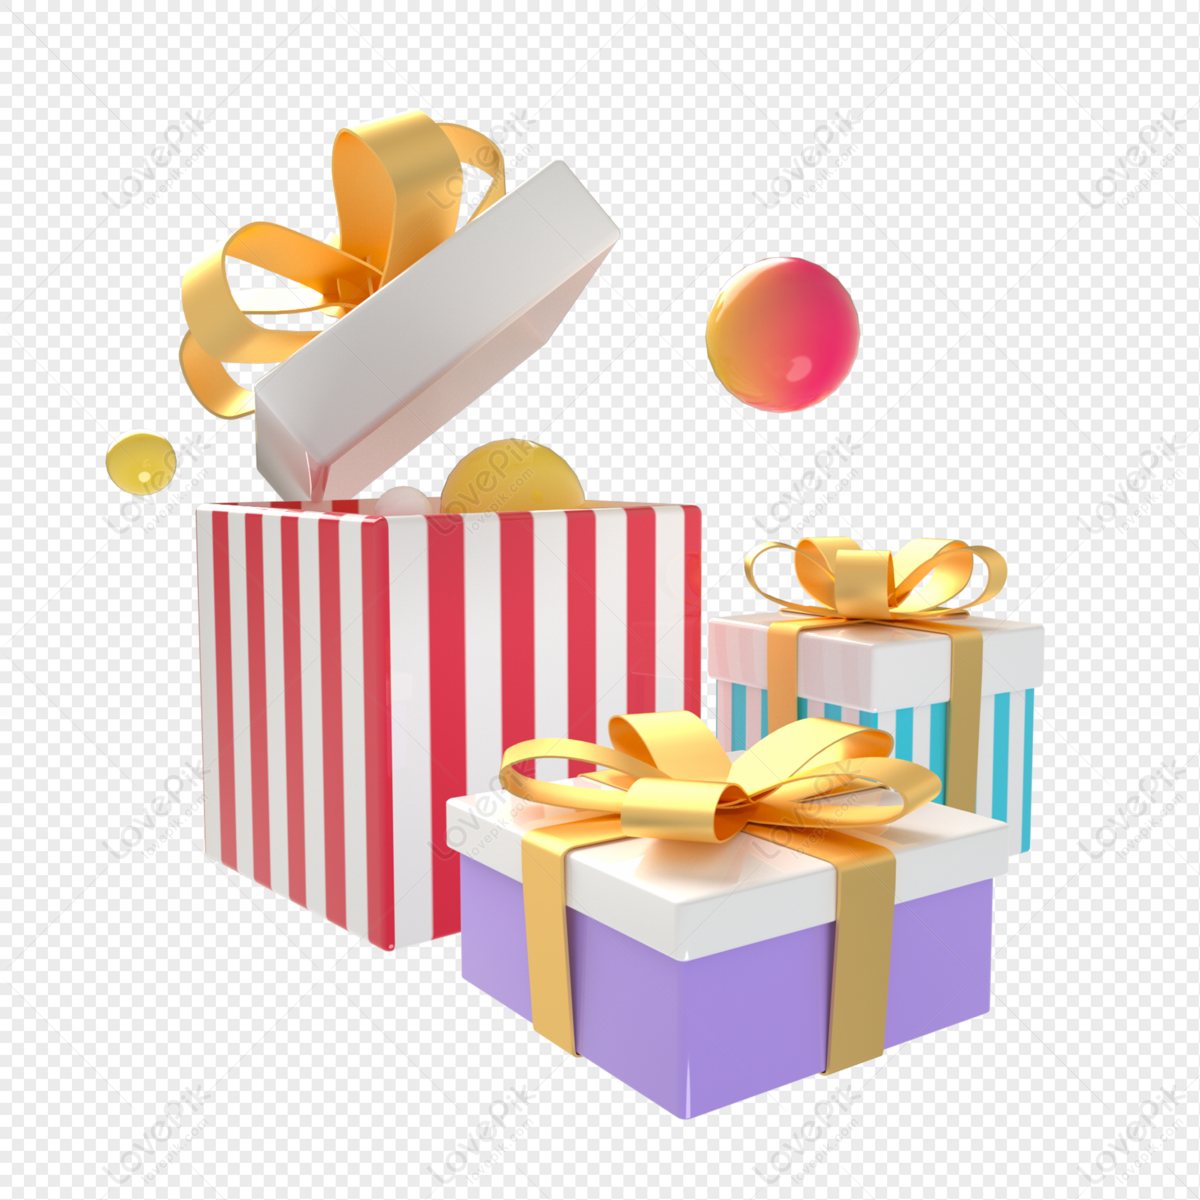 Three Dimensional Gift Box PNG Transparent Background And Clipart Image For  Free Download - Lovepik | 401441940